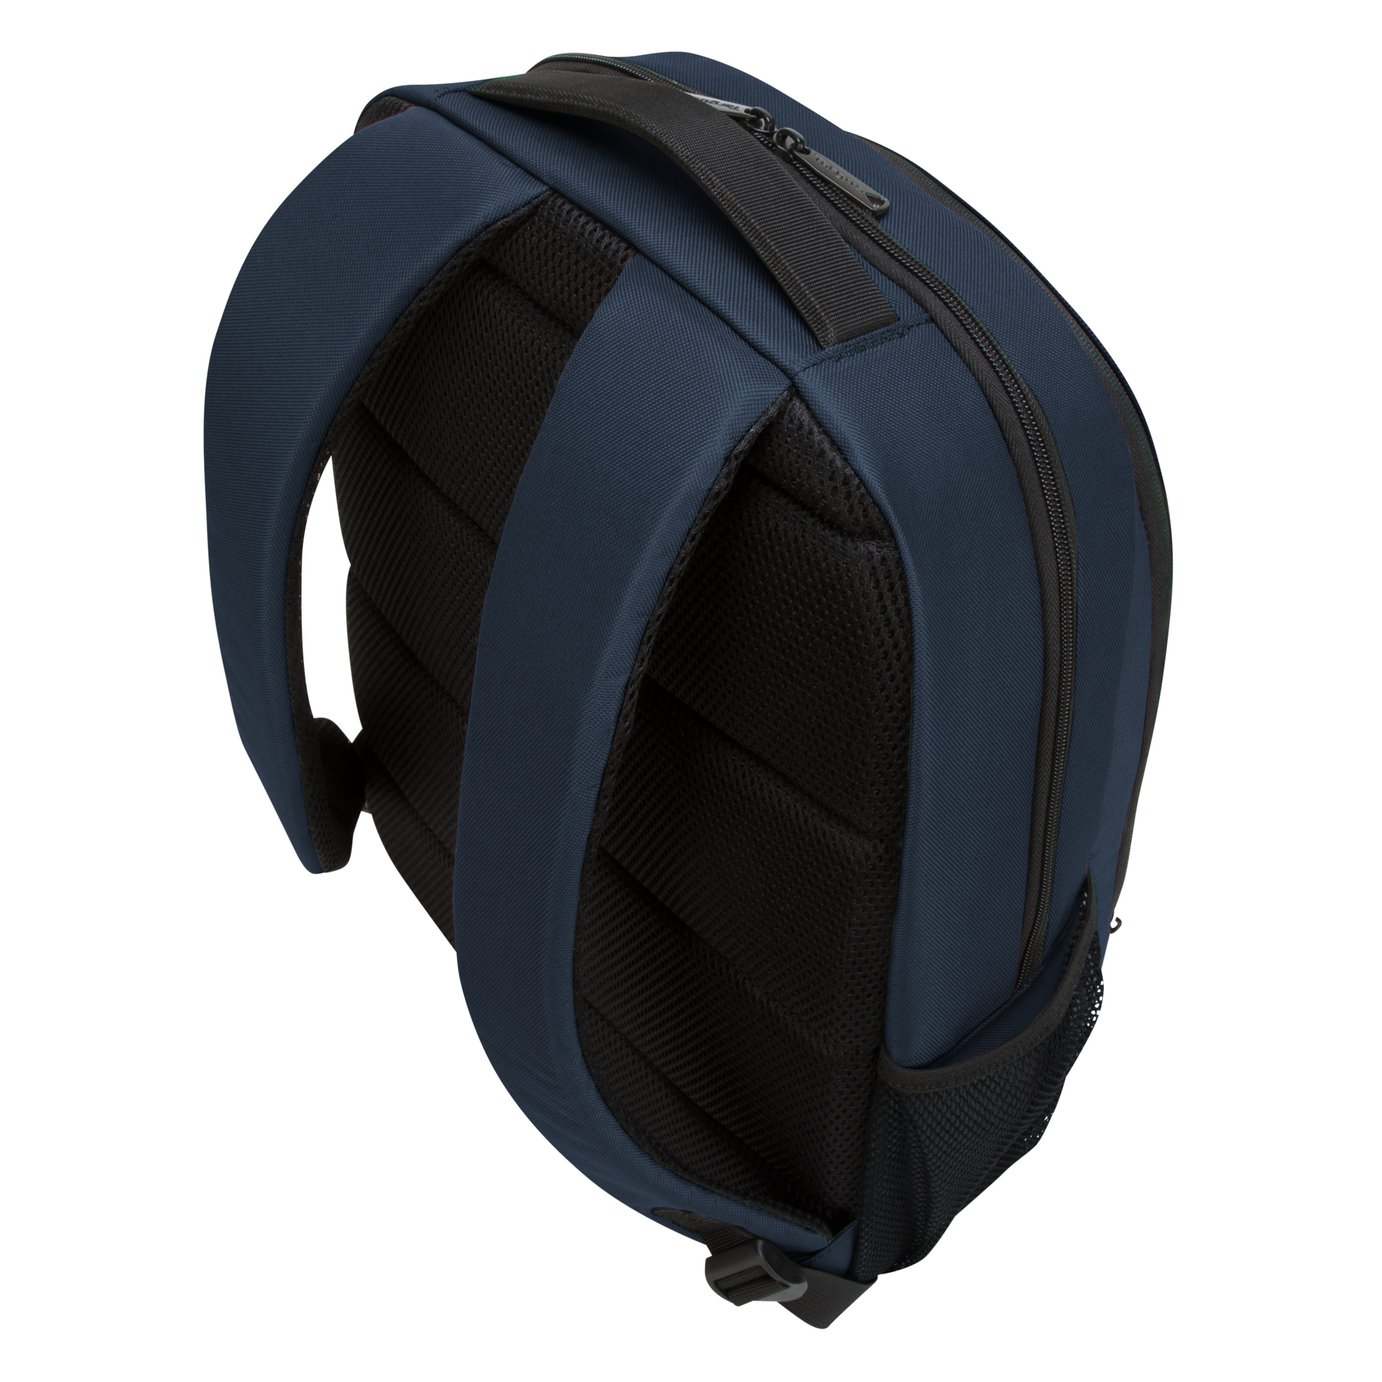 Targus Octave 15.6 Inch Laptop Backpack Review